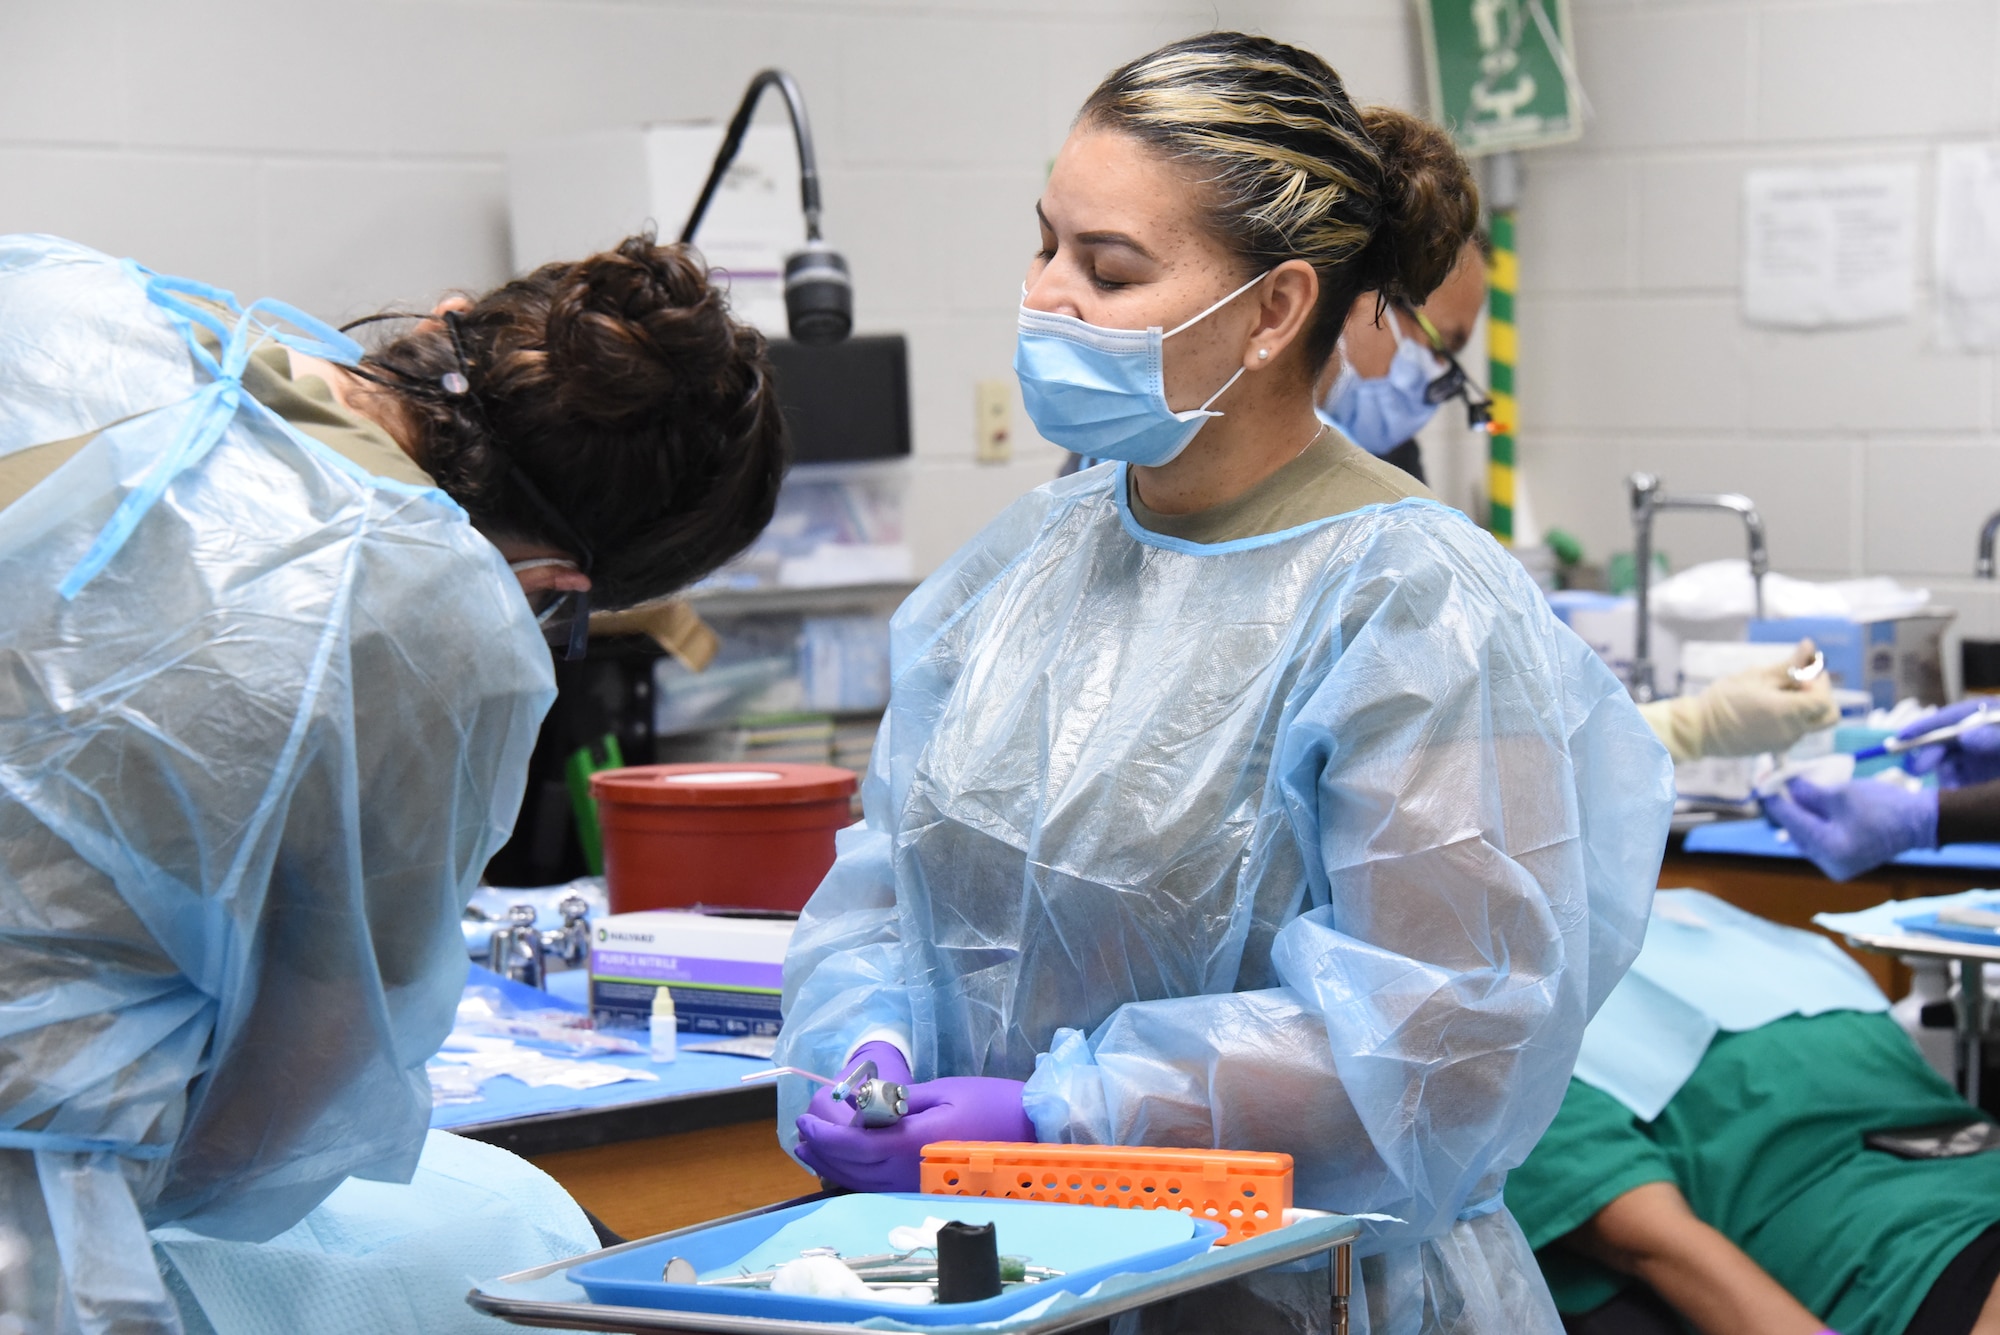 U.S. Air National Guard Master Sgt. Jessica Martinez, a 185th Air Refueling Wing dental assistant, helps provide dental services to a patient.